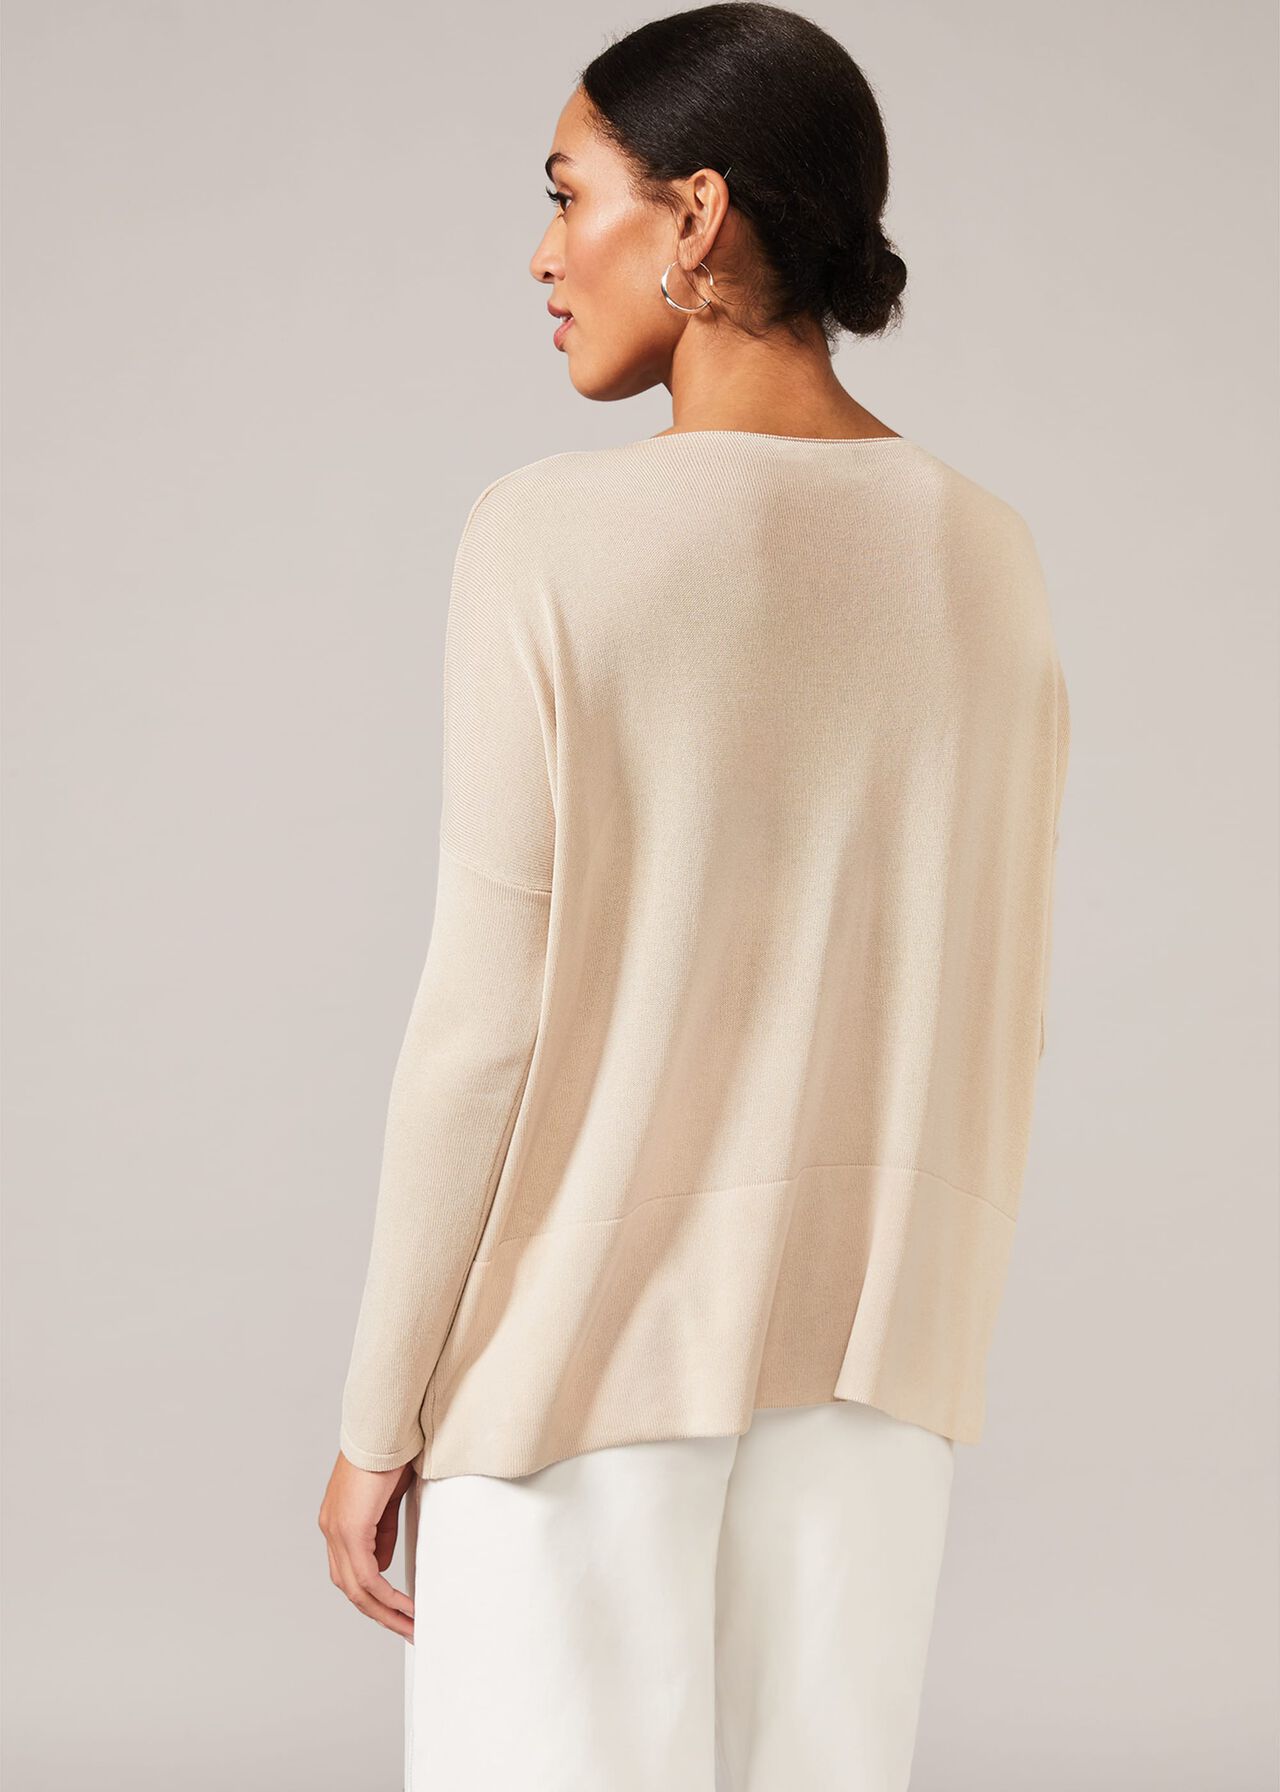 Bai Relaxed Knit Top